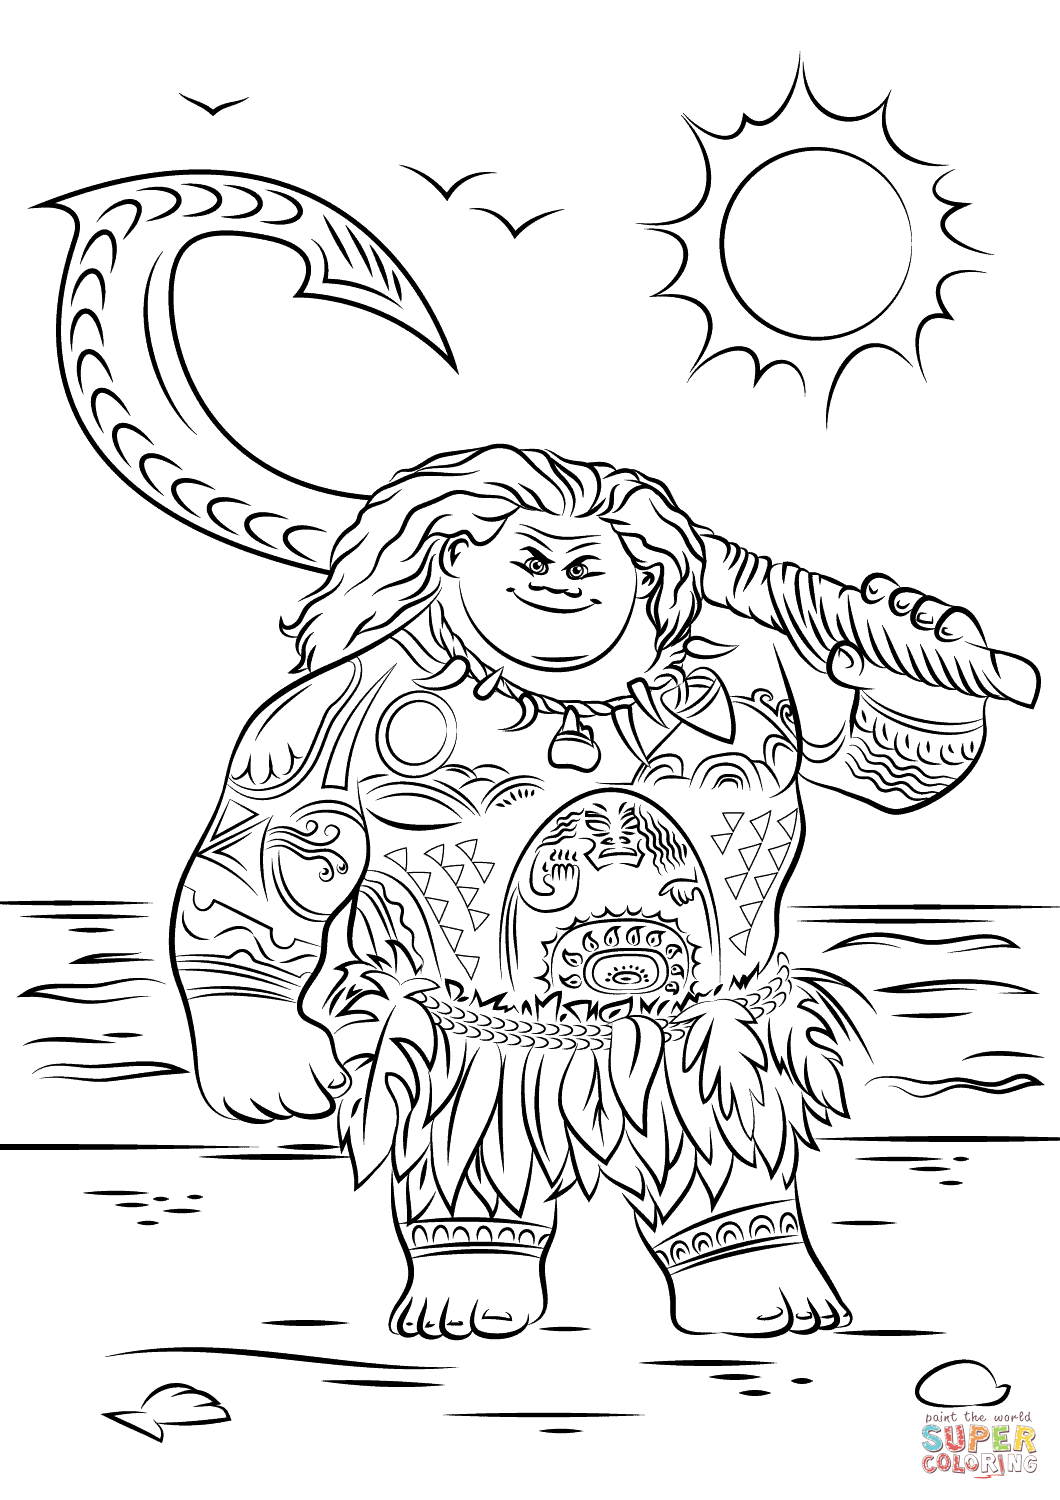 Vaiana coloring pages to download - Moana Kids Coloring Pages